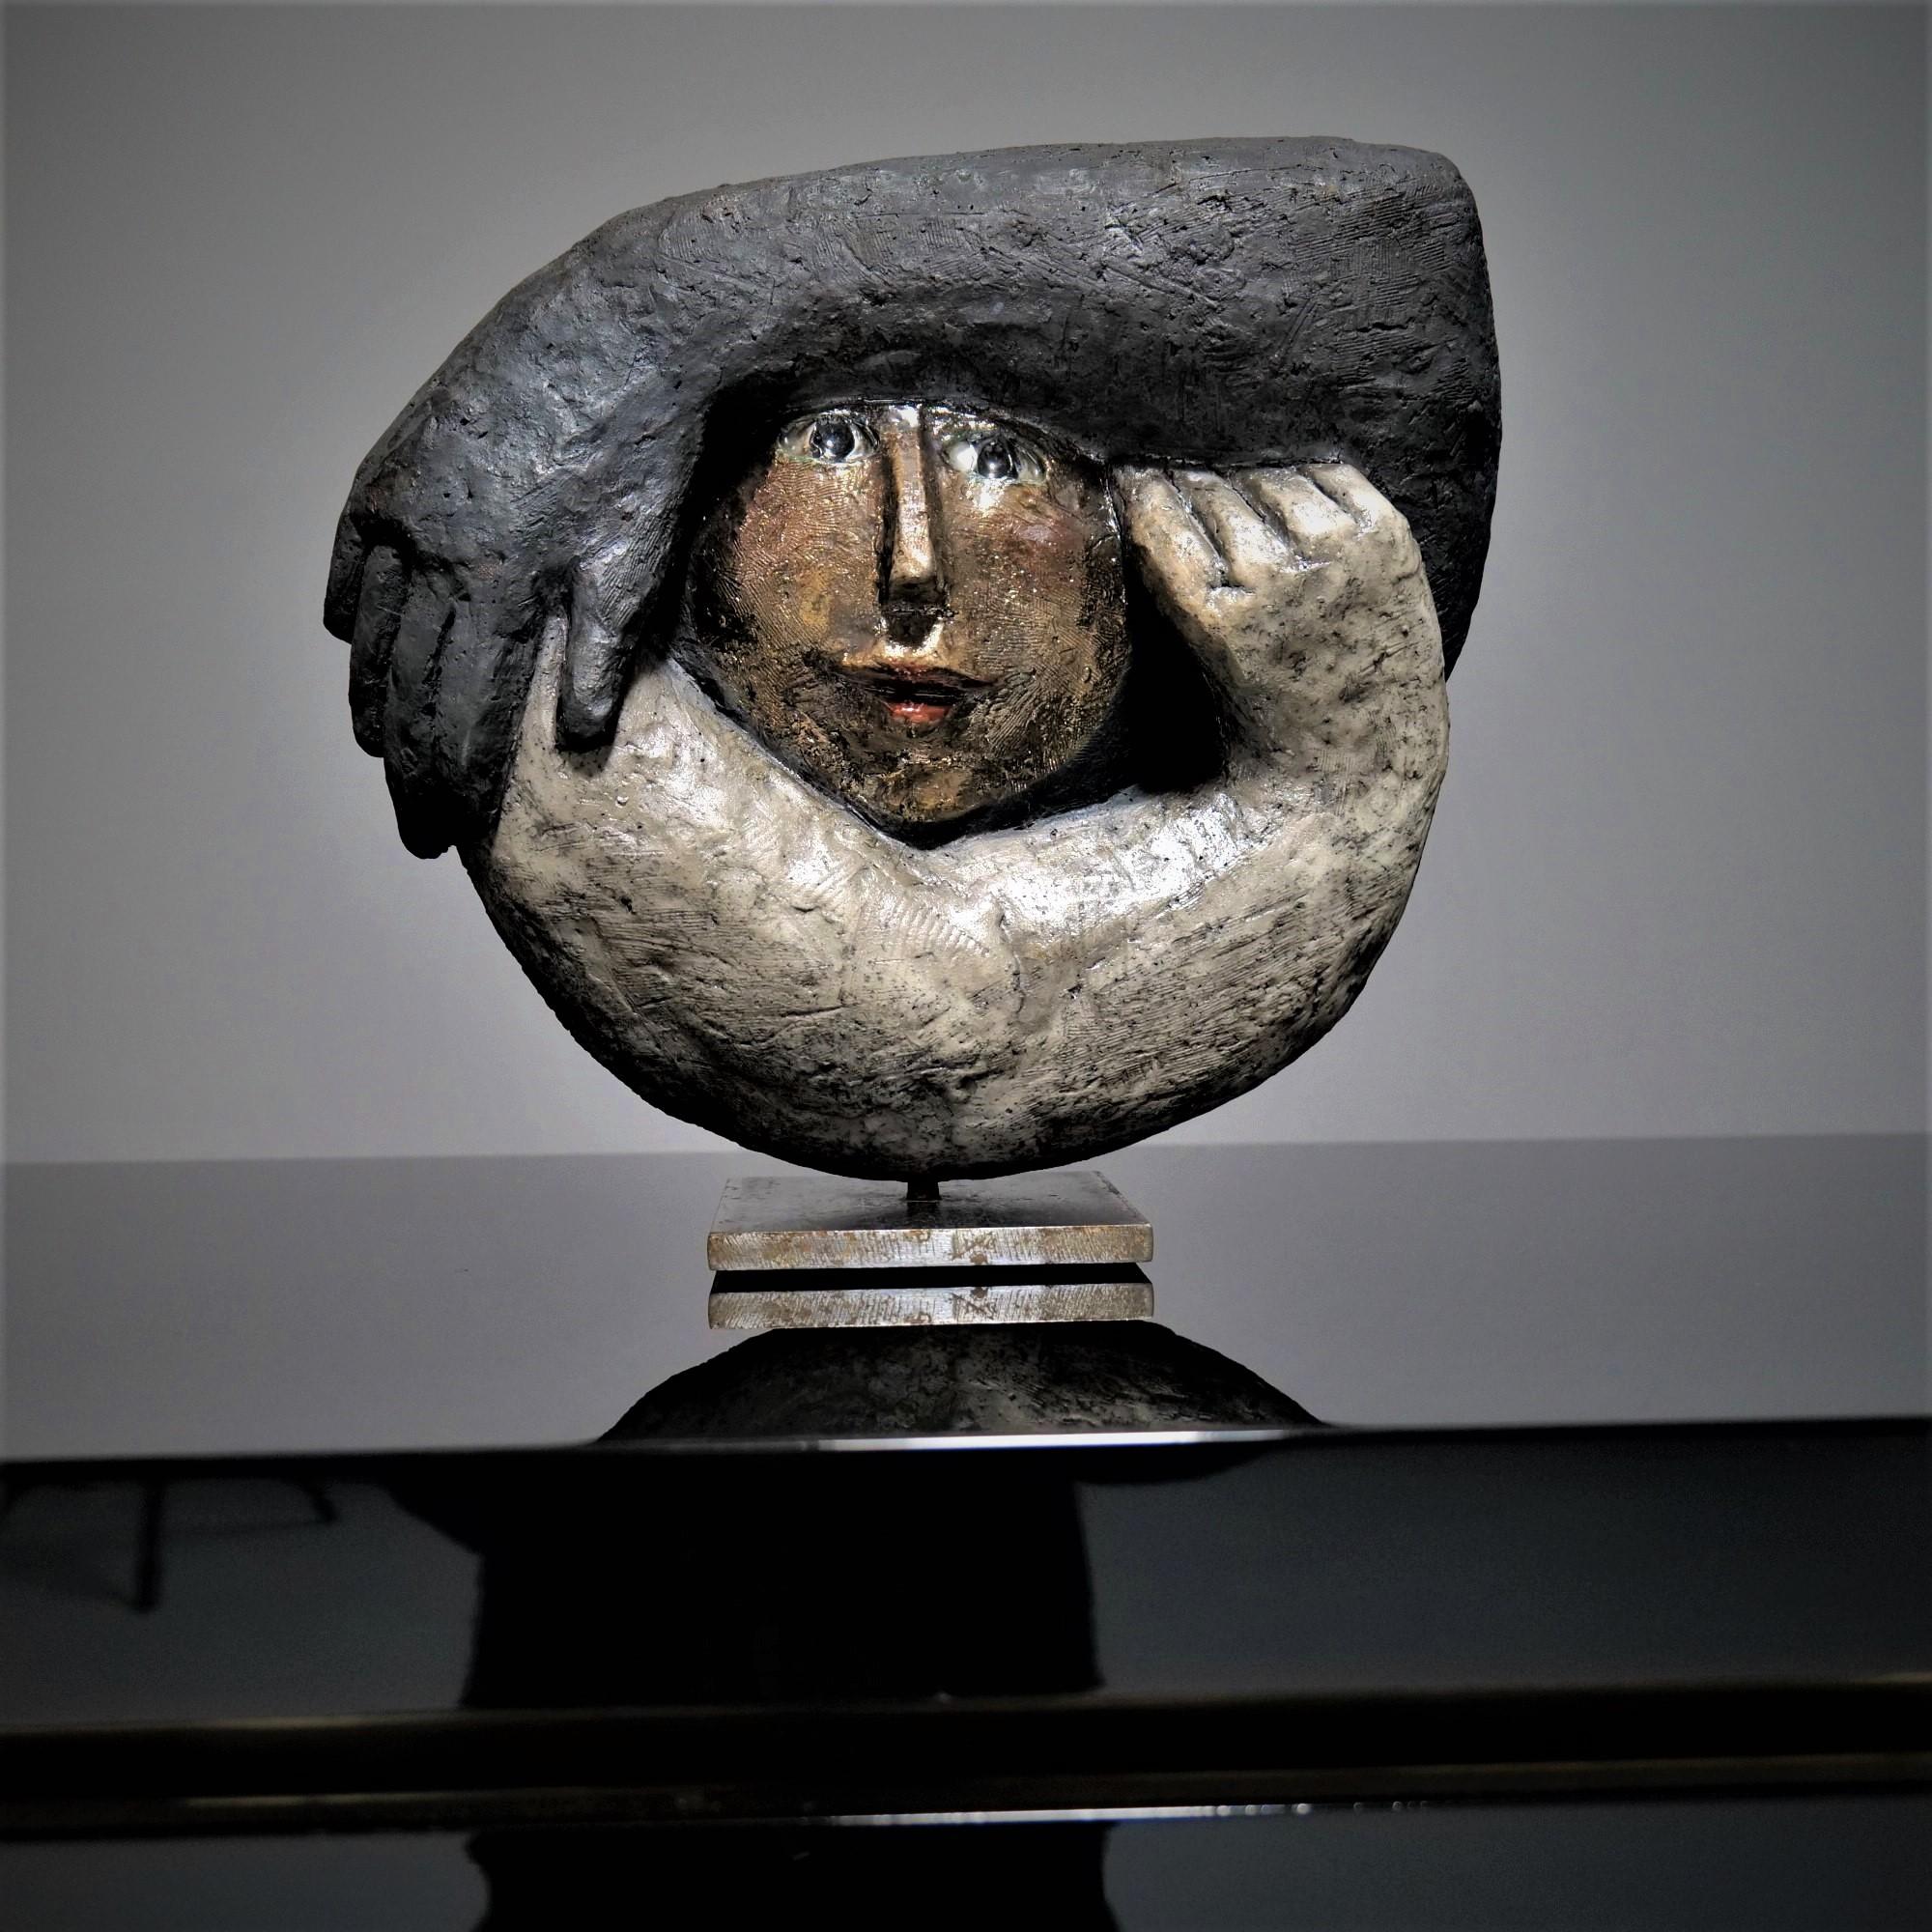 The object was exhibited in Stuttgart in 2002 as part of an exhibition called “The Poetry of Ceramics”.
The double-sided ceramic called “Kokon” shows on the raised side two arms lying in a circle, which frame a golden face.
The opposite side, kept